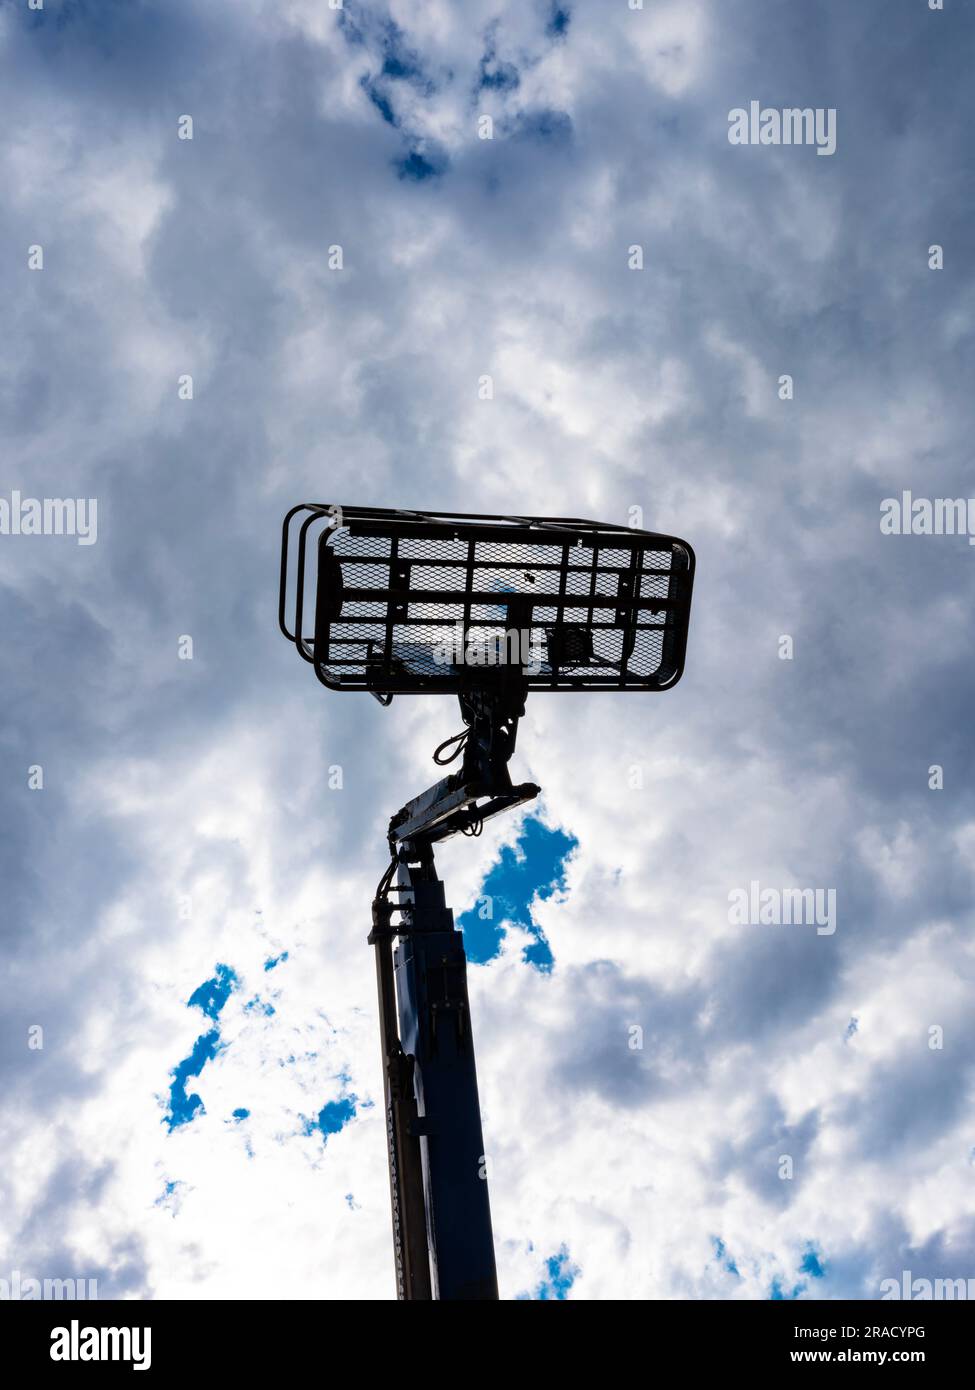 A cherry picker (an aerial work platform or bucket truck) against a dramatic cloudy sky Stock Photo